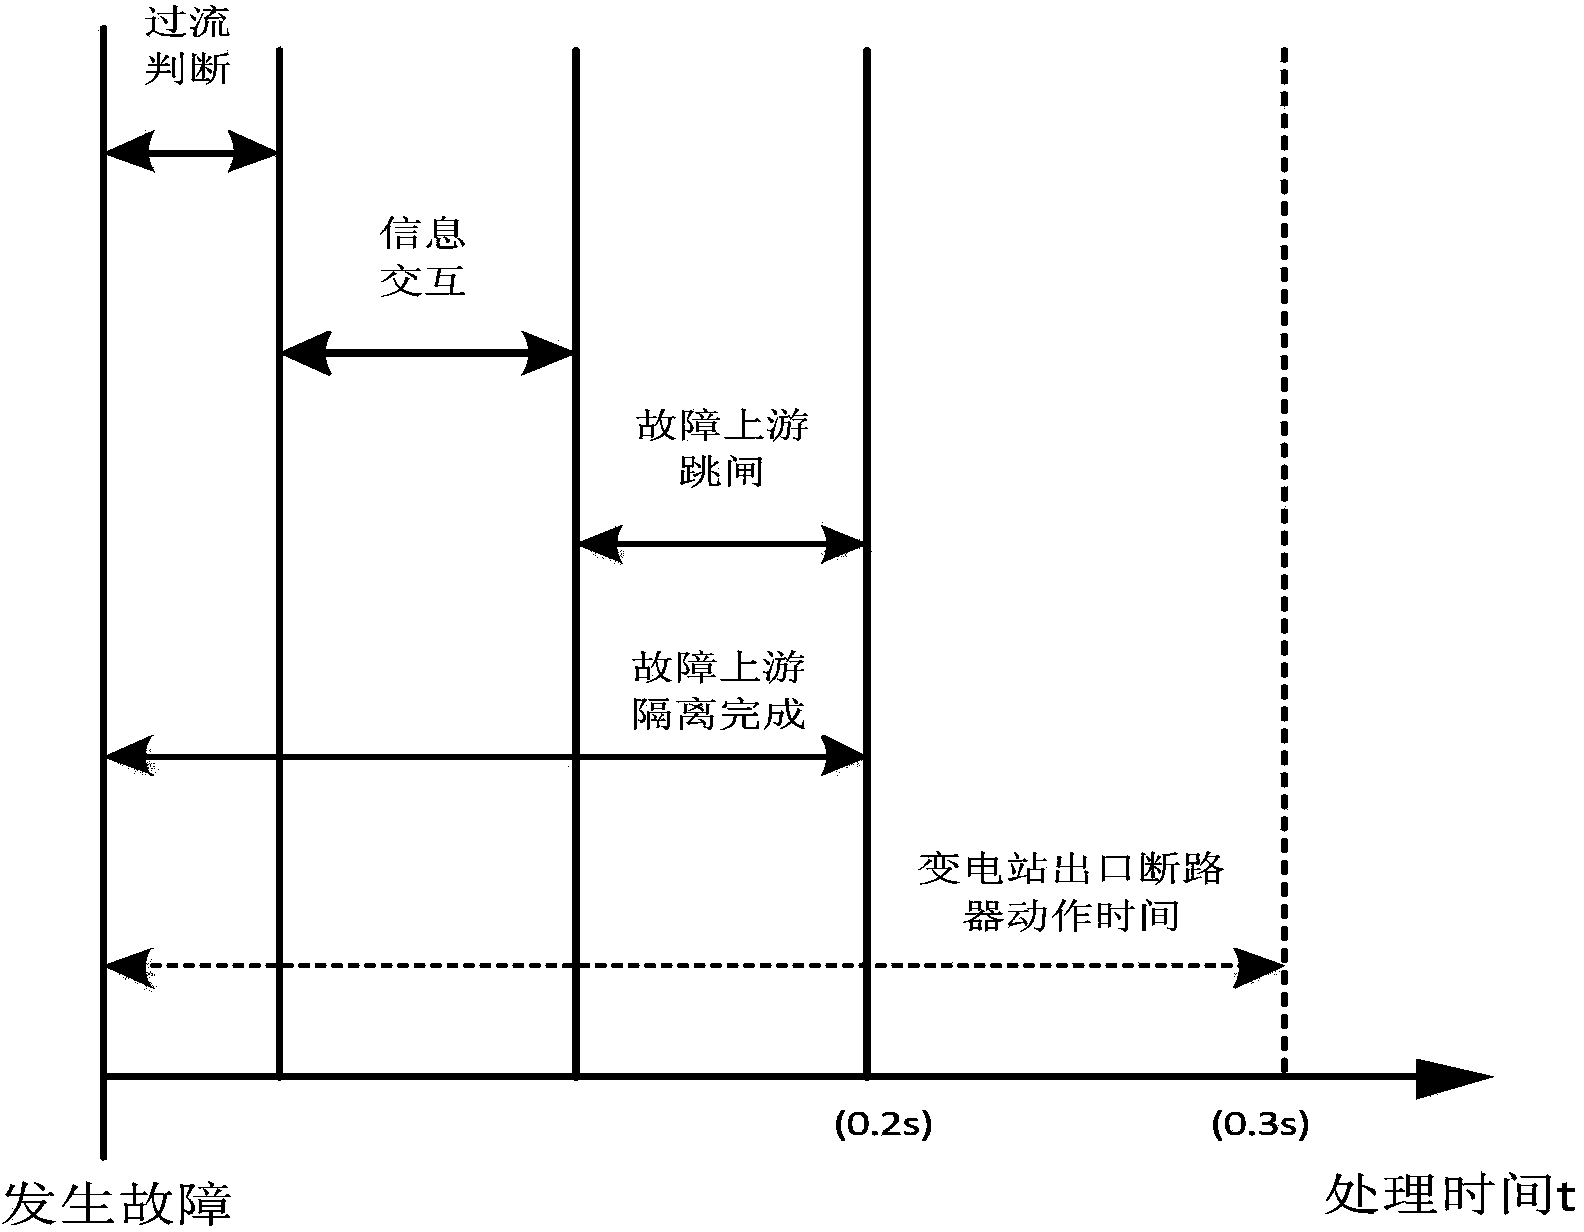 Intelligent lengthways interconnected feeder line automatic control method